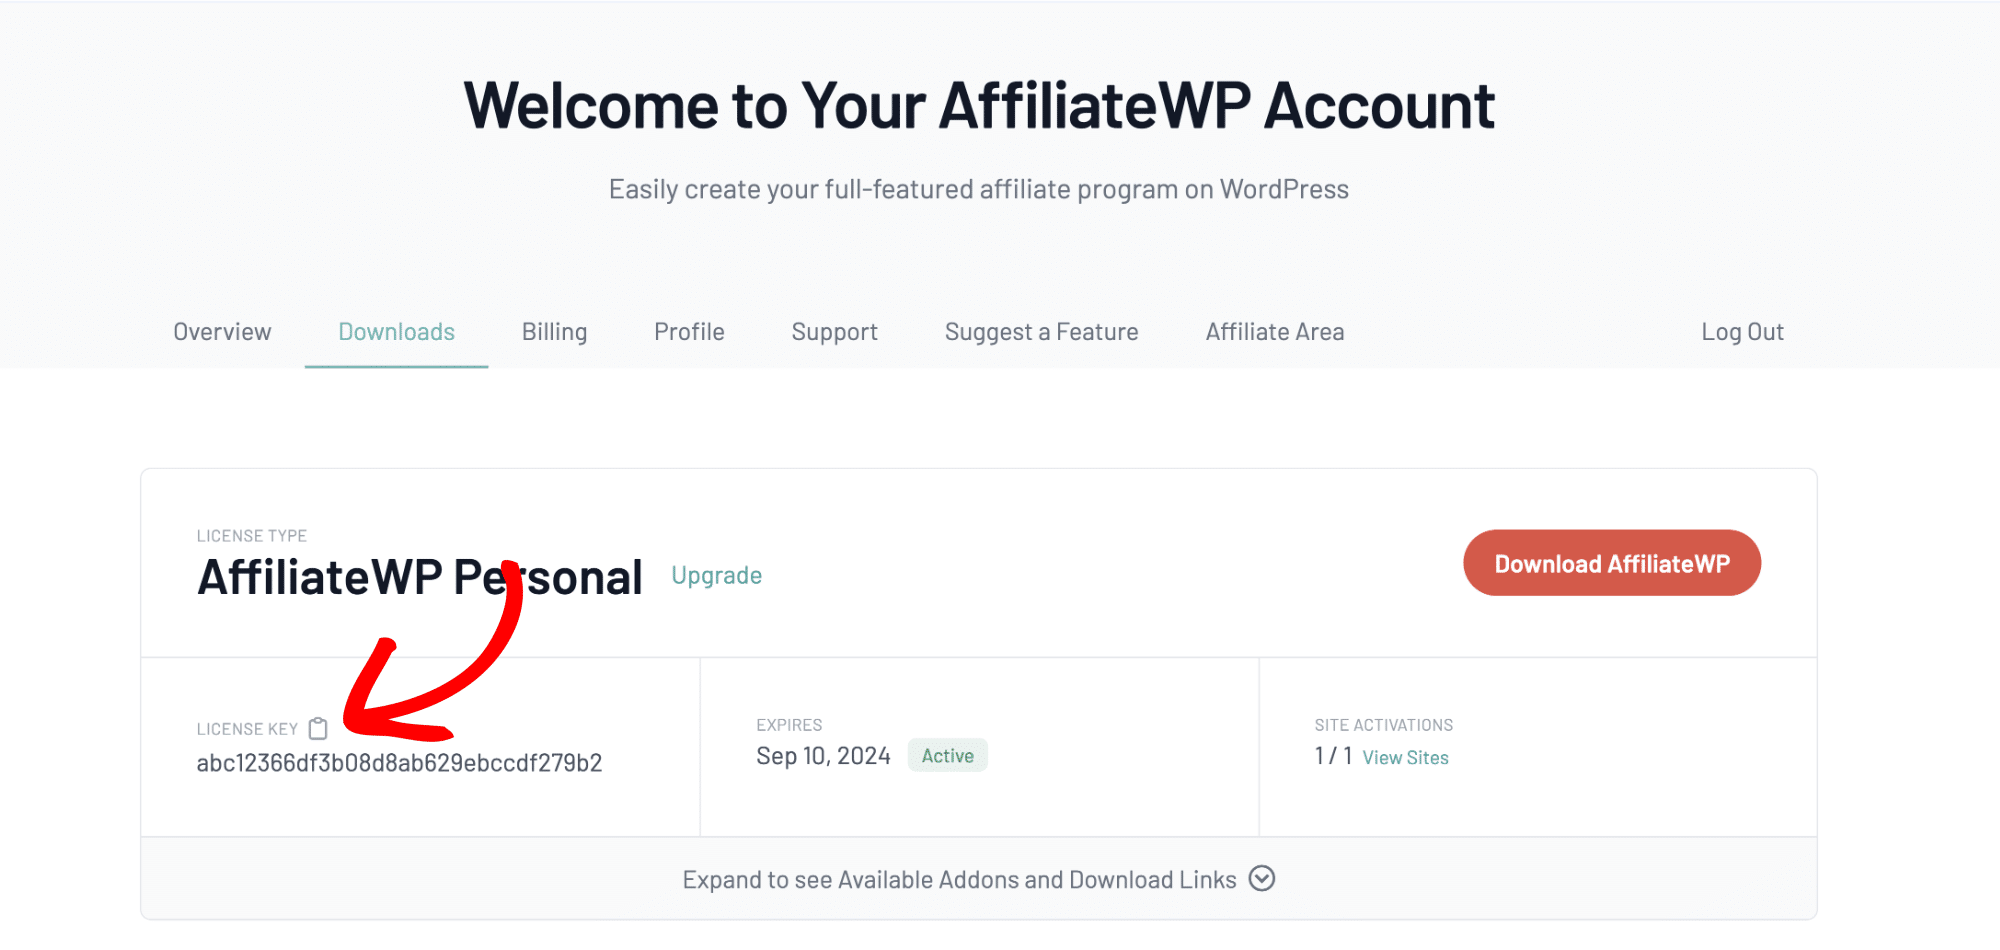 Copying an AffiliateWP license key